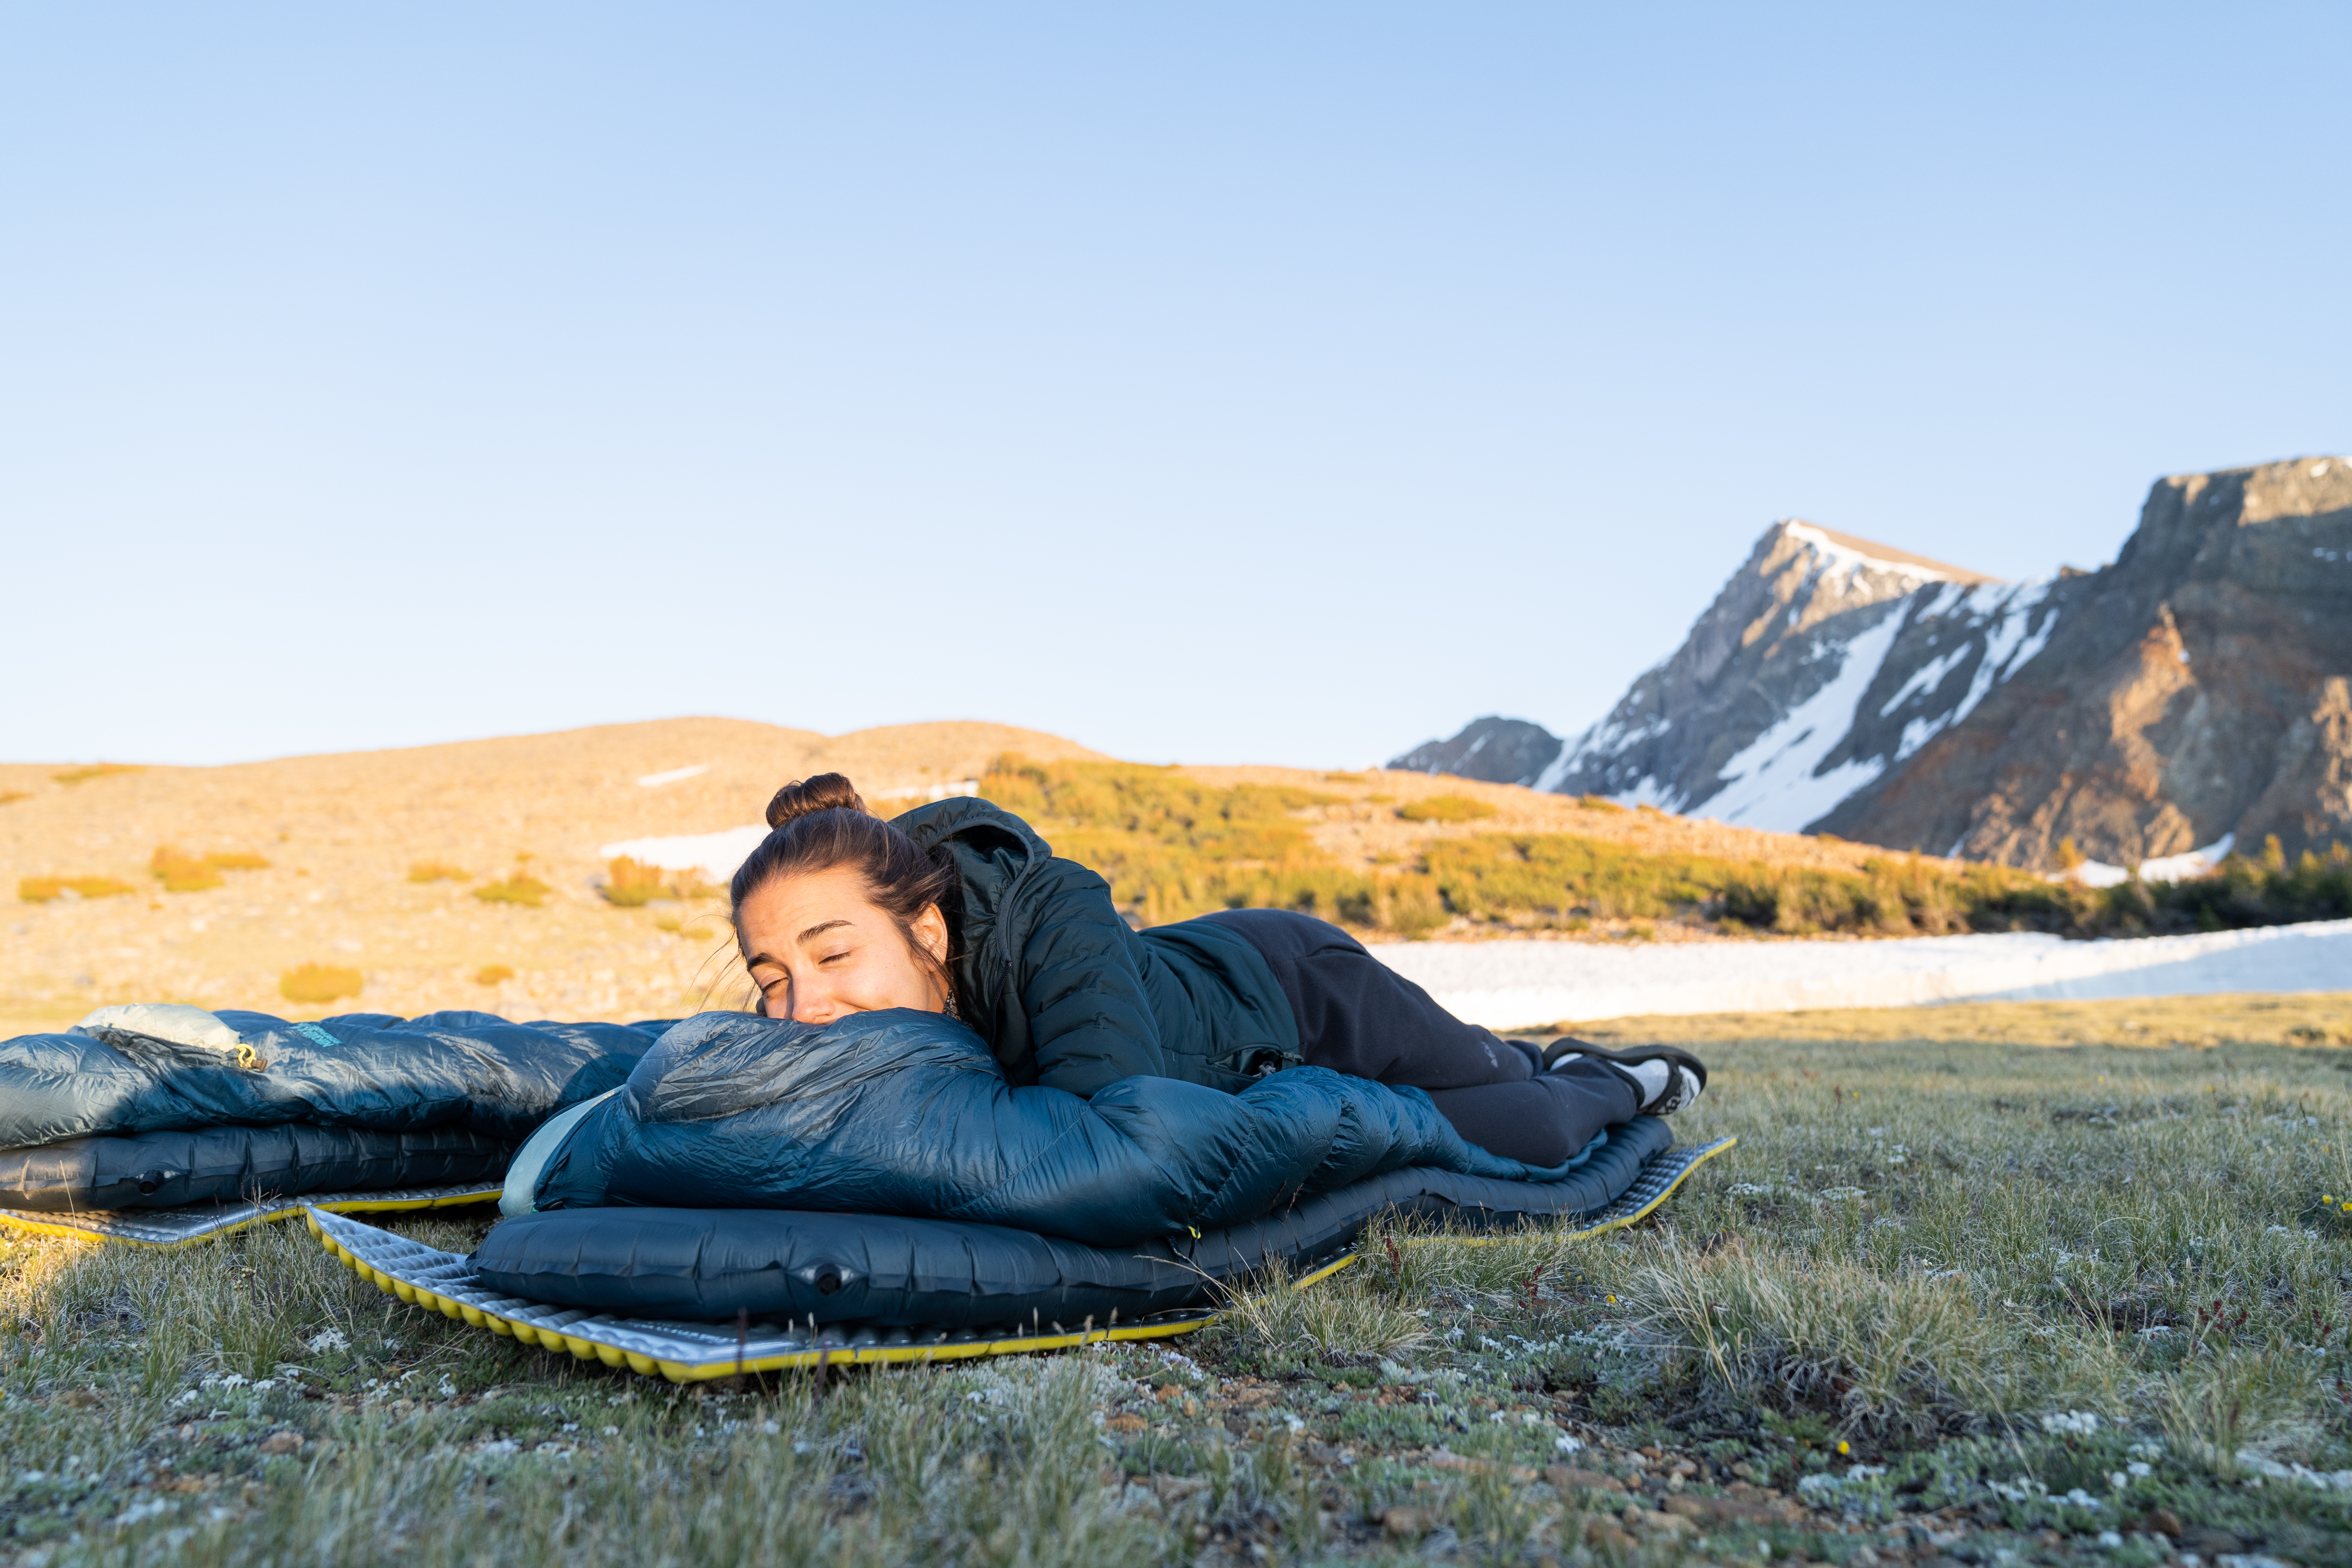 sleep system for backpacking